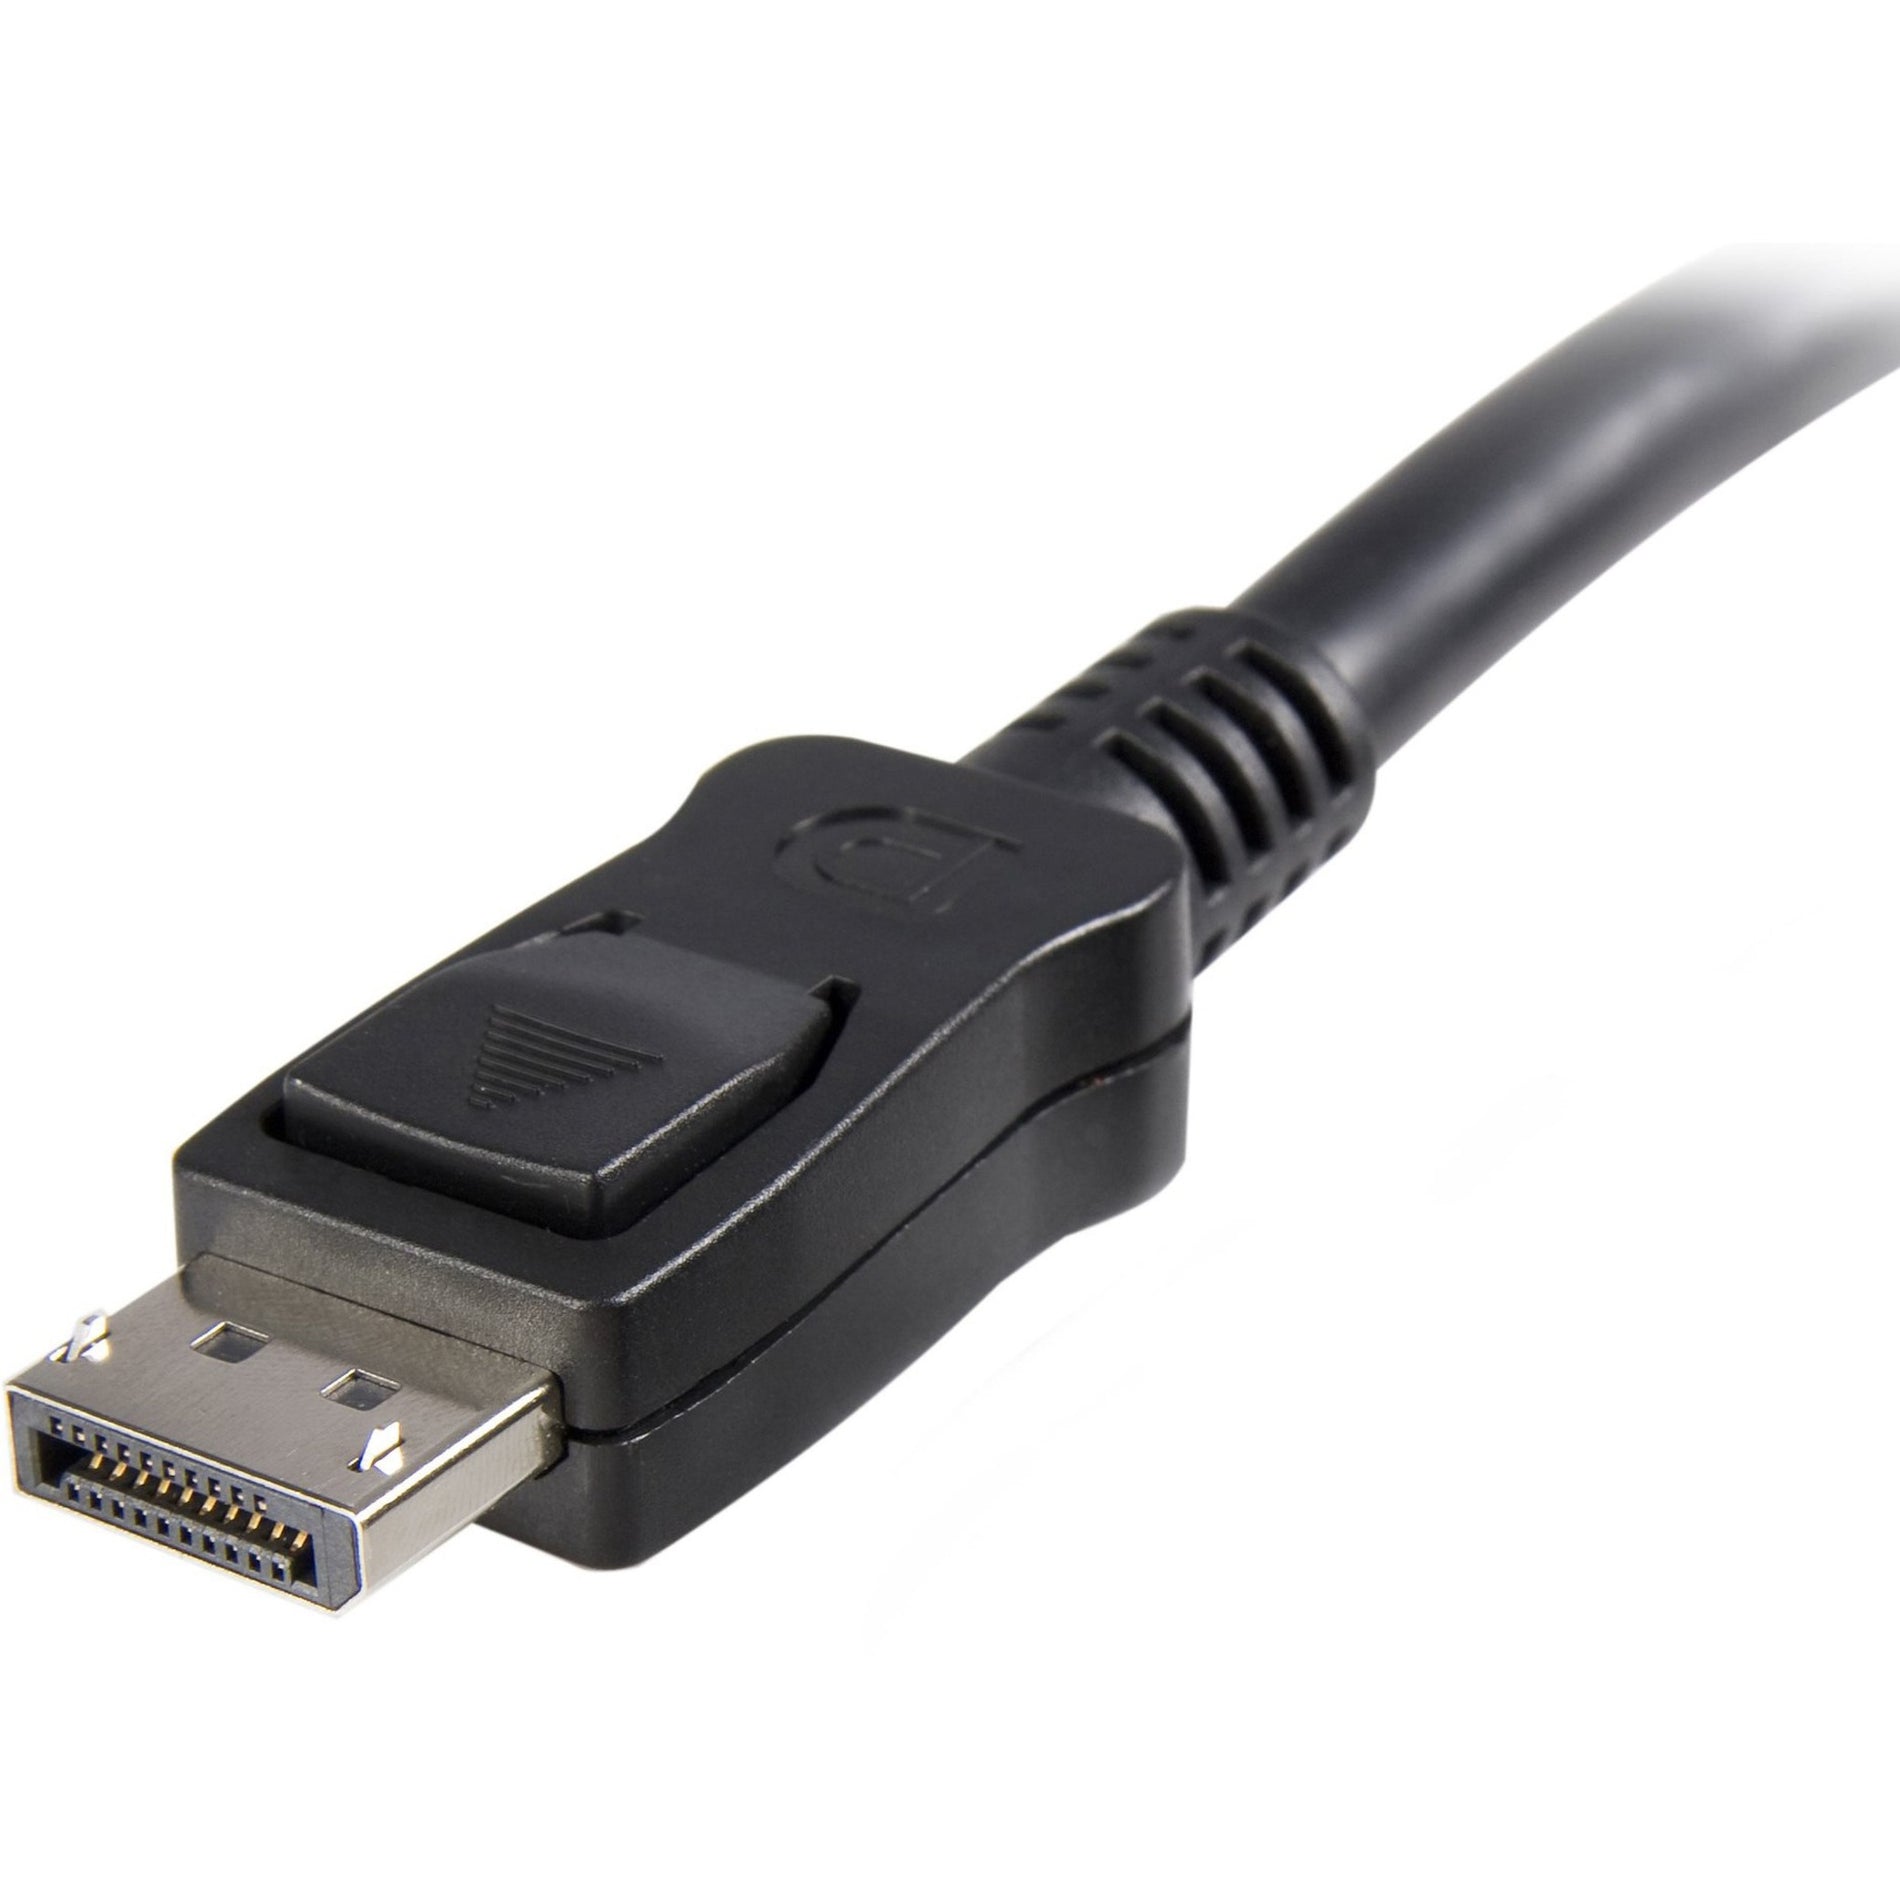 StarTech.com DISPLPORT25L 25 ft DisplayPort Cable with Latches - M/M, 10.8 Gbit/s Data Transfer Rate, 4096 x 2160 Supported Resolution